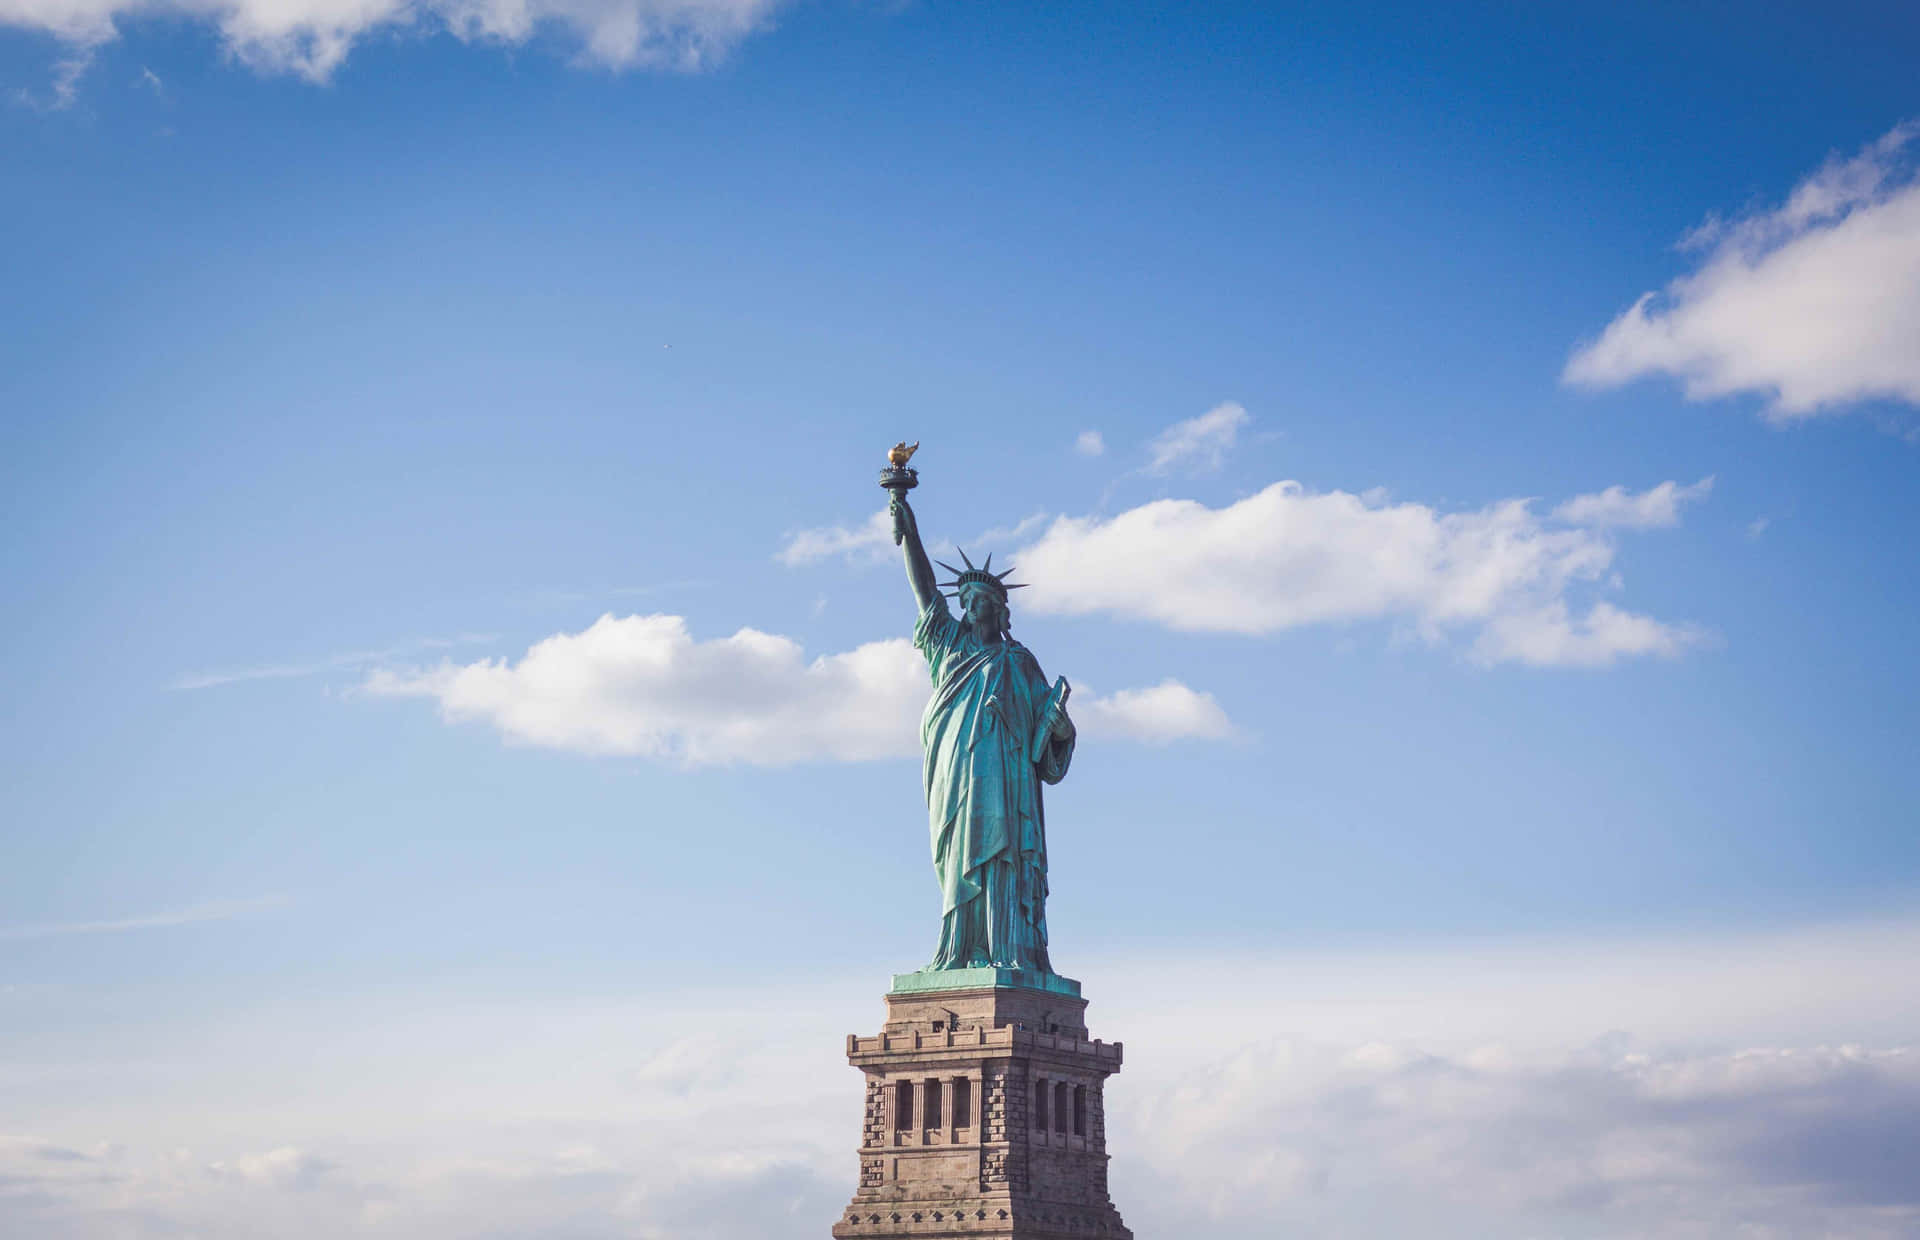 A symbol of freedom and hope, the Statue of Liberty stands tall over the New York city skyline.